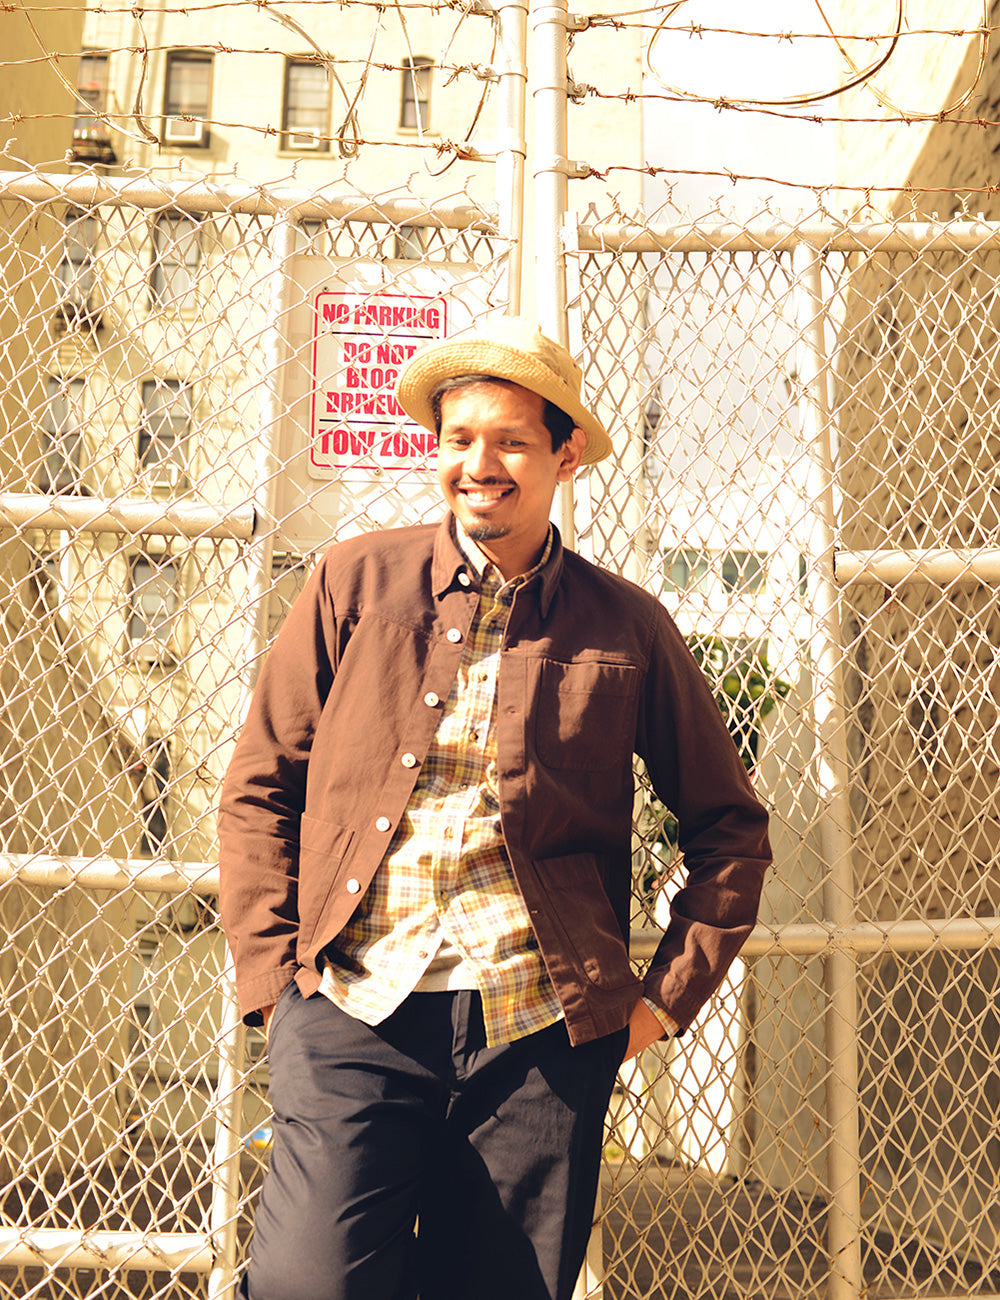 Model wears navy chinos, a plaid button-down shirt, brown cotton shirt jacket, and seersucker bucket hat. He is standing in front of a chain link fence.